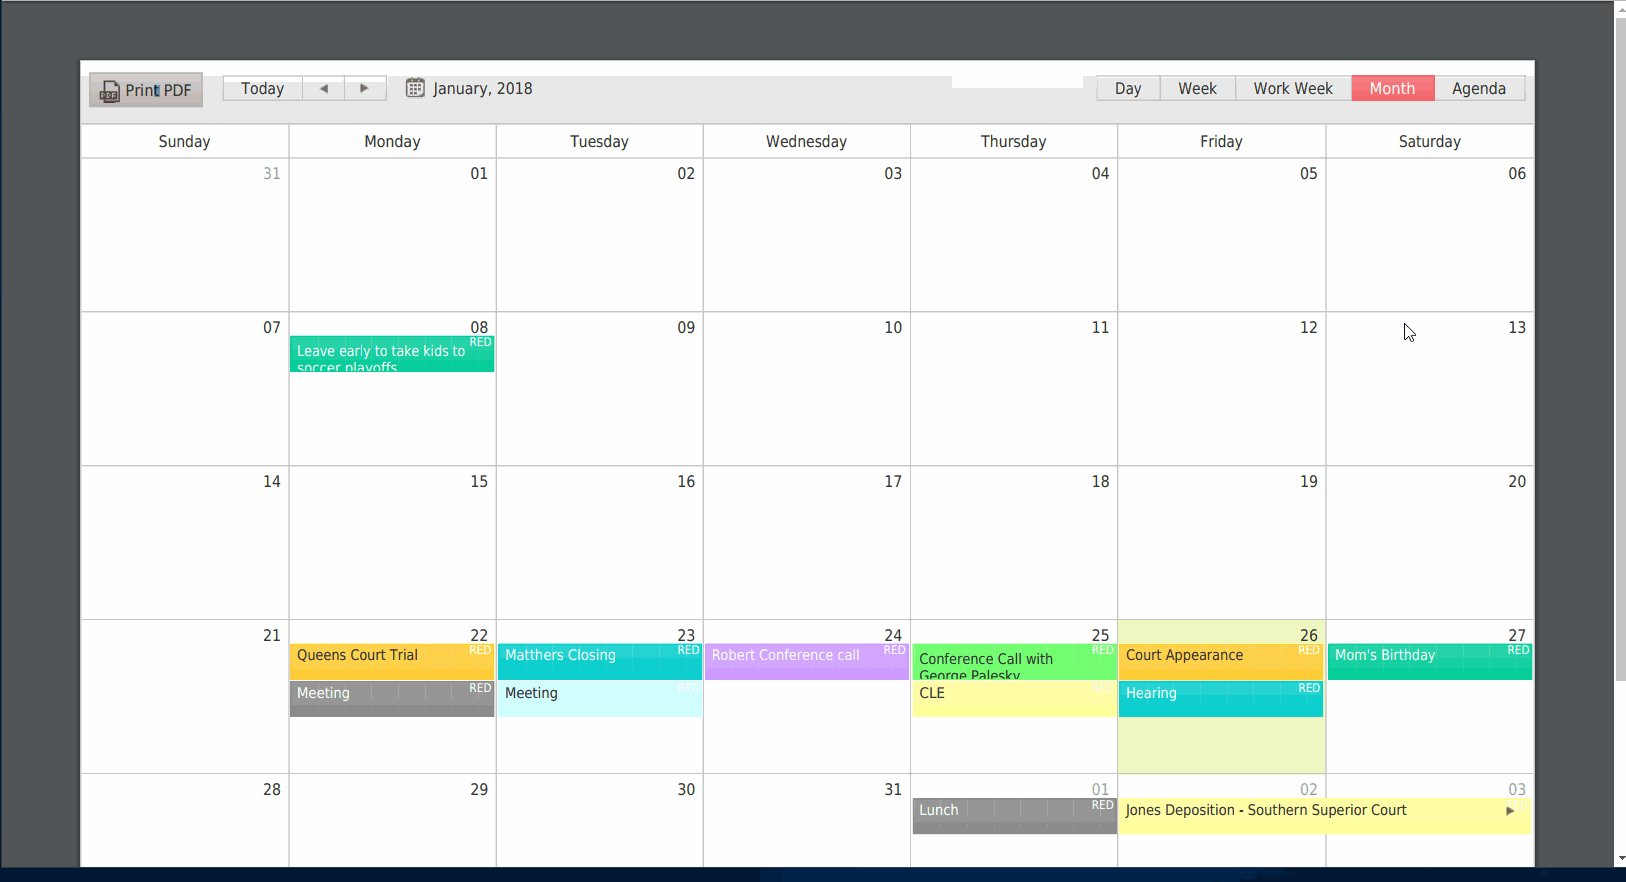 Is there a way to print out my Calendar?